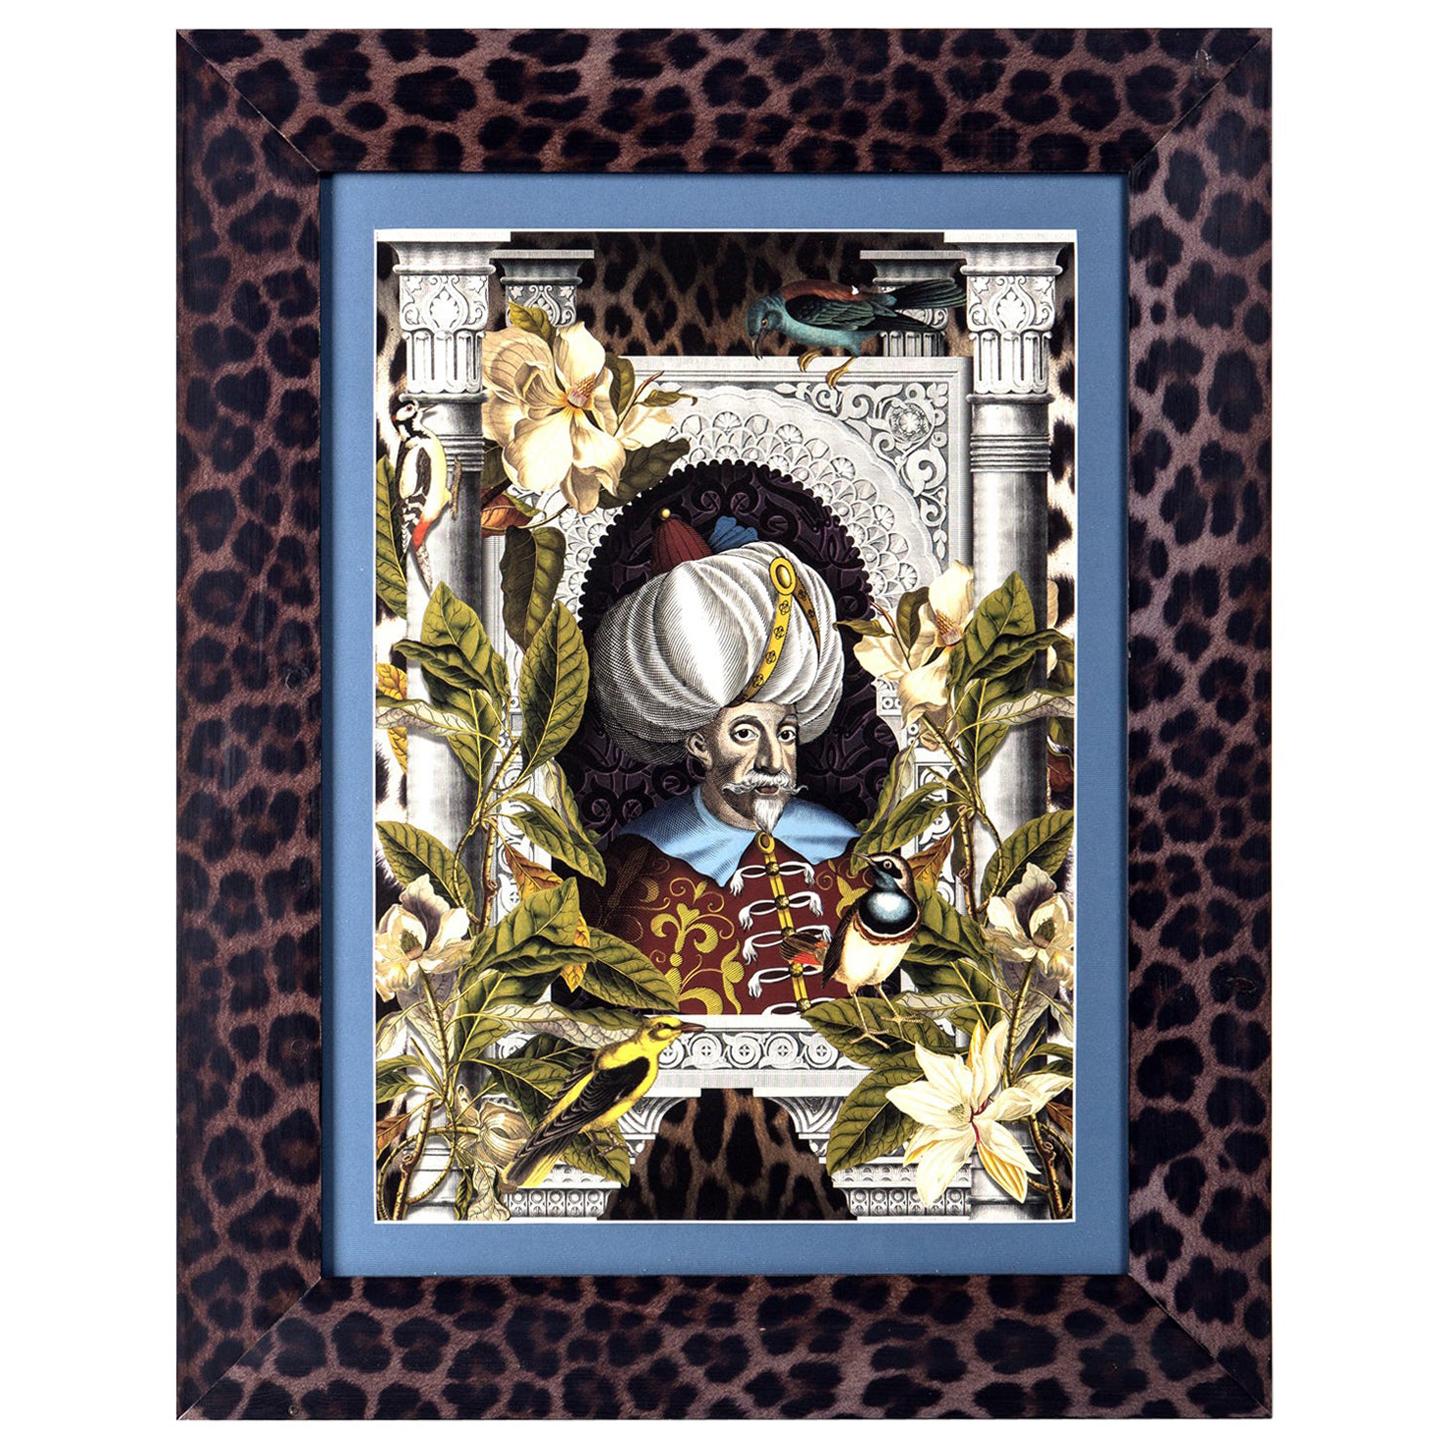 Italian Contemporary Gliceé Ottoman Print n.2 with Printed Leopard Wood Frame For Sale